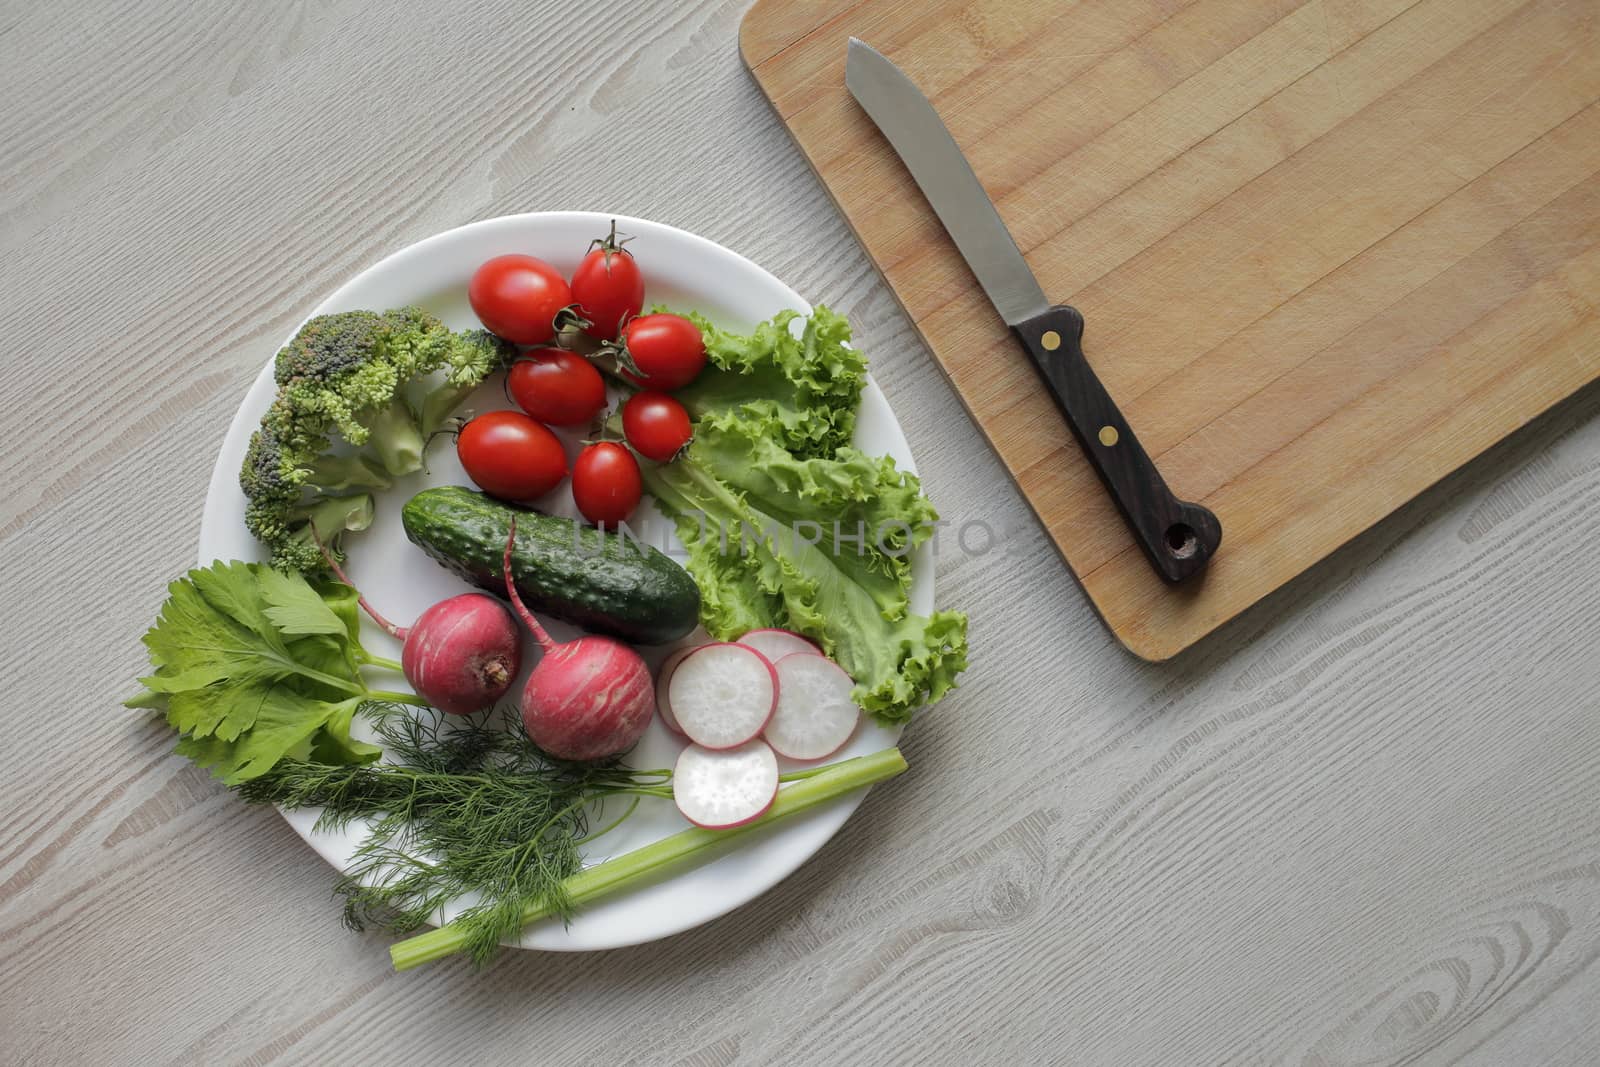 Fresh vegetables in a white plate on a light wooden table. On a plate, tomatoes, cucumber, lettuce, broccoli, radish. Cutting board